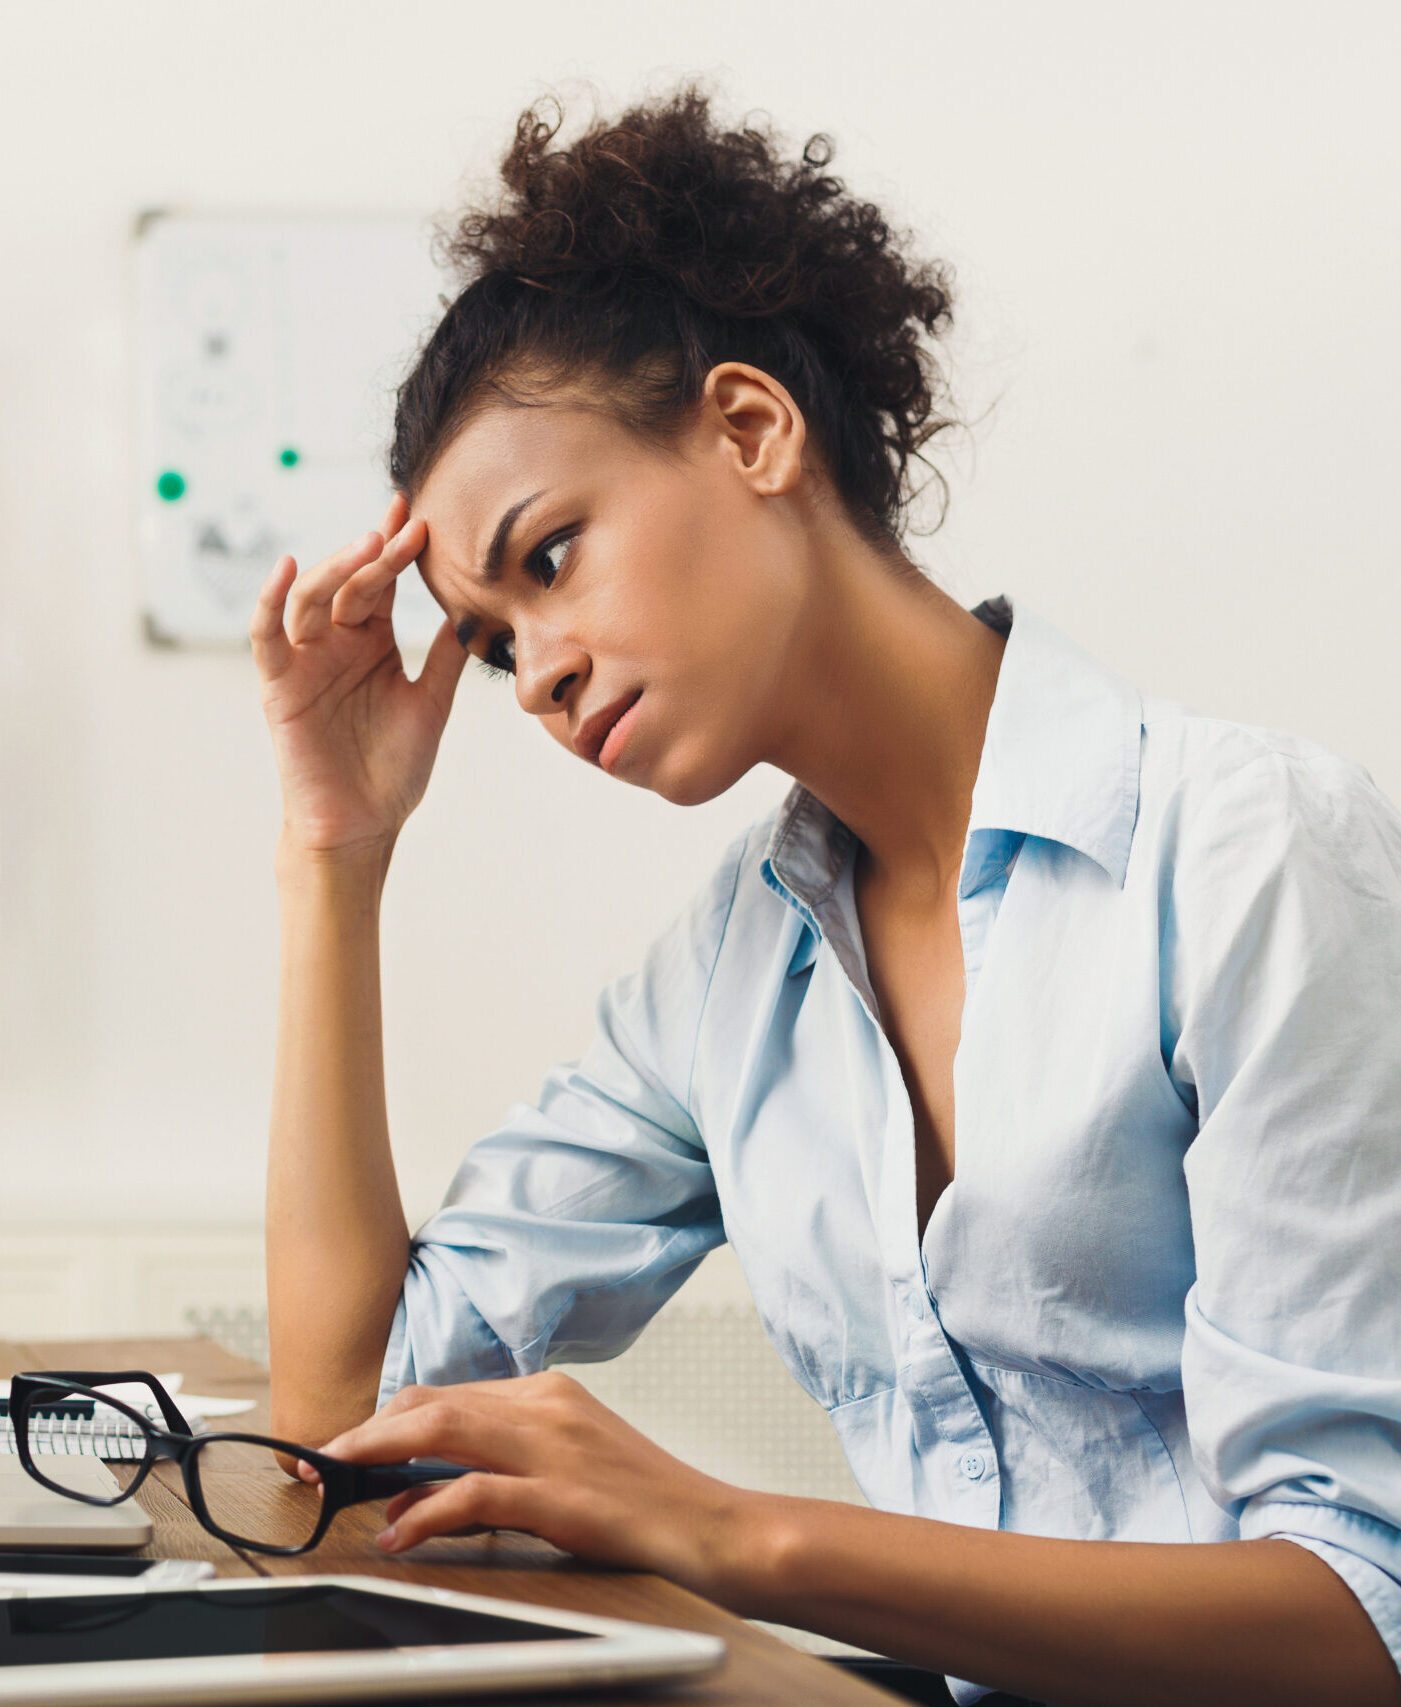 Frustrated business woman with headache at office